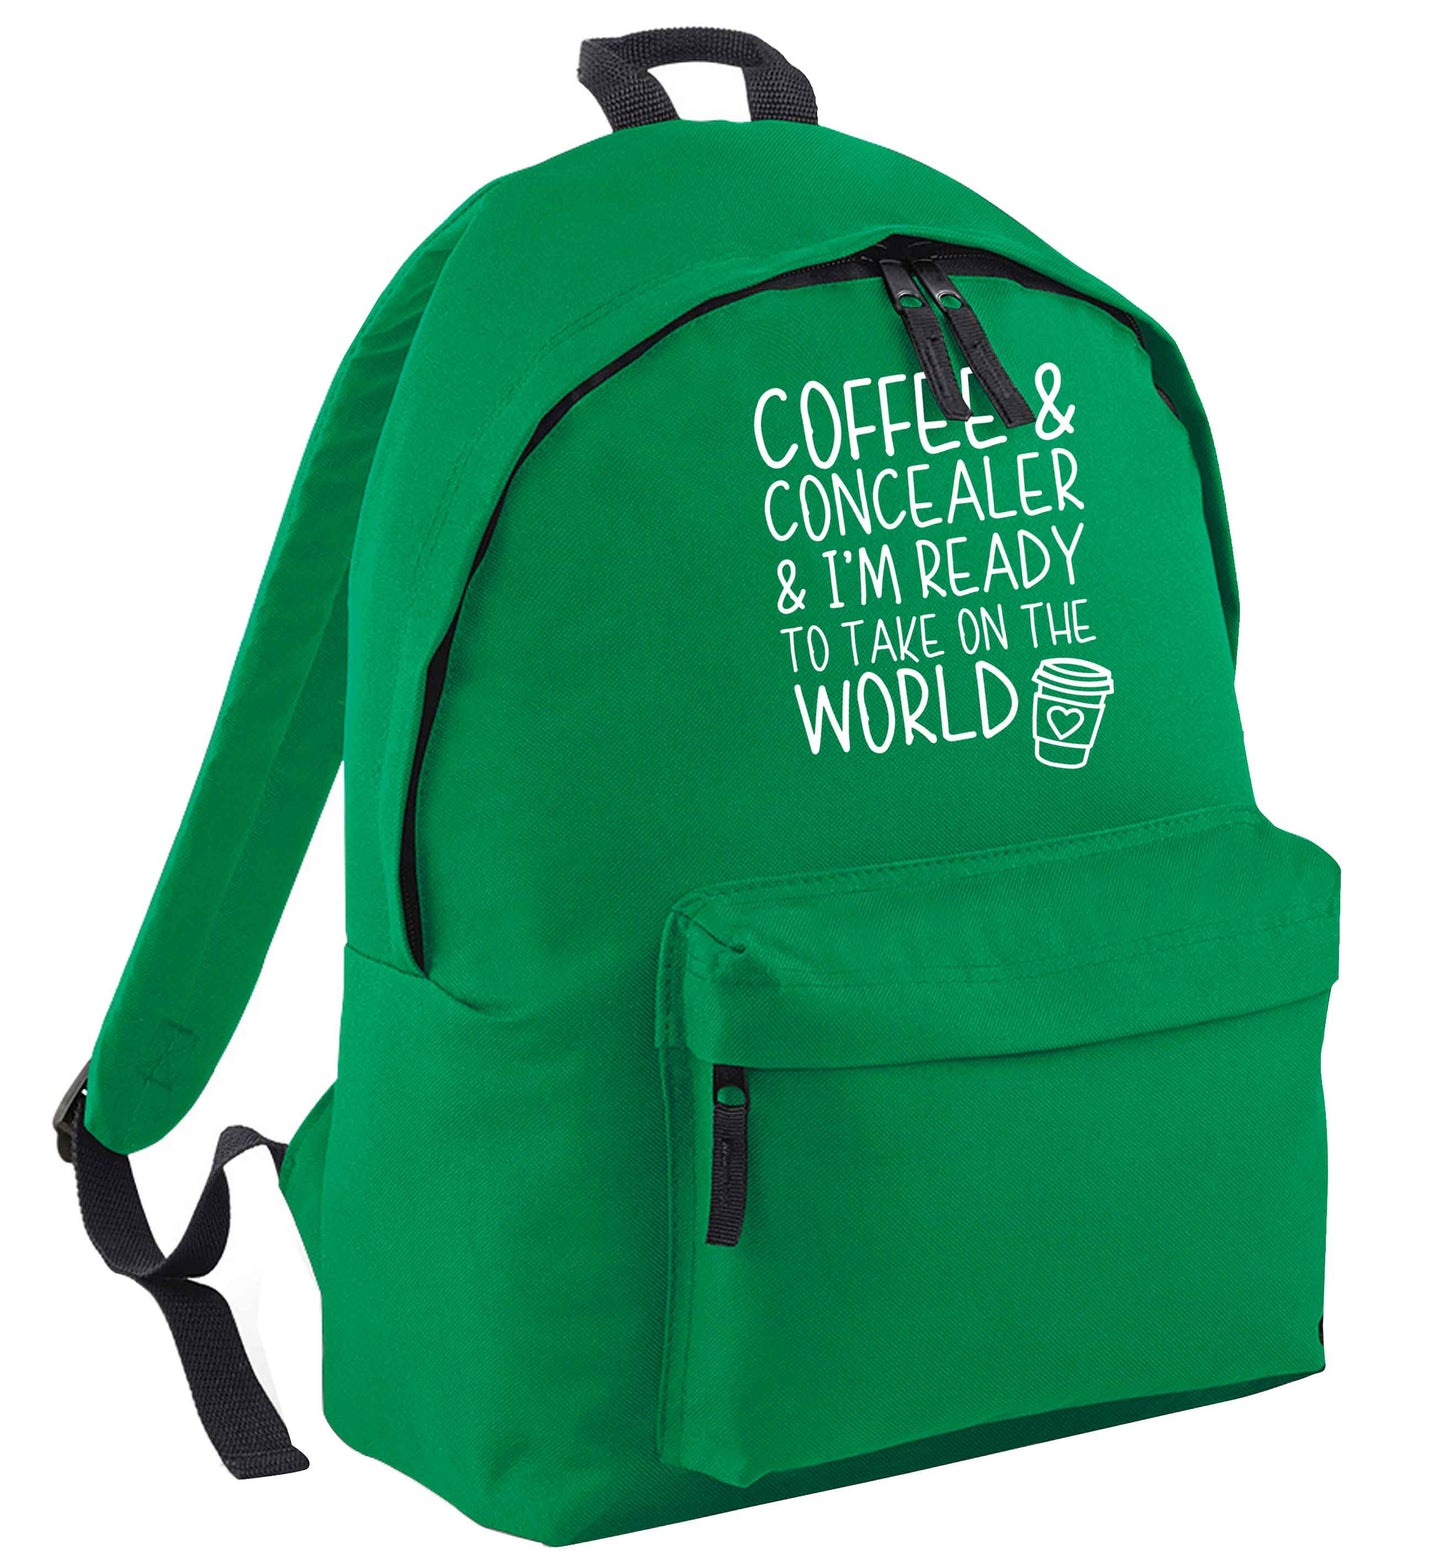 Coffee and concealer and I'm ready to take on the world green adults backpack